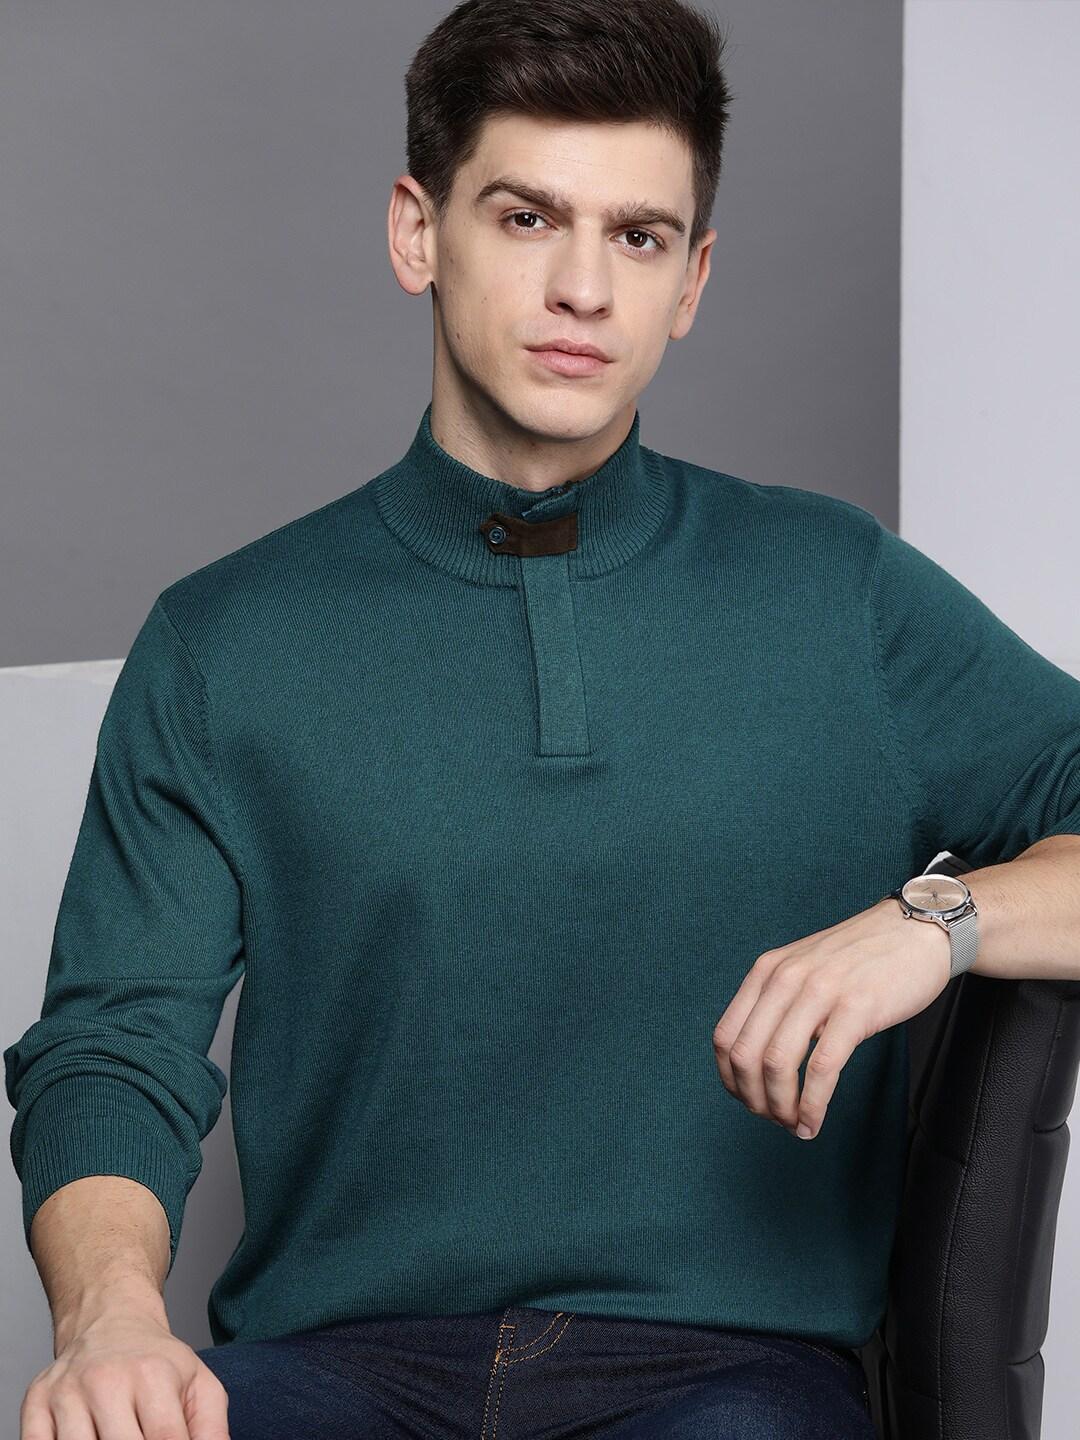 kenneth-cole-men-teal-green-solid-mock-neck-pullover-sweater